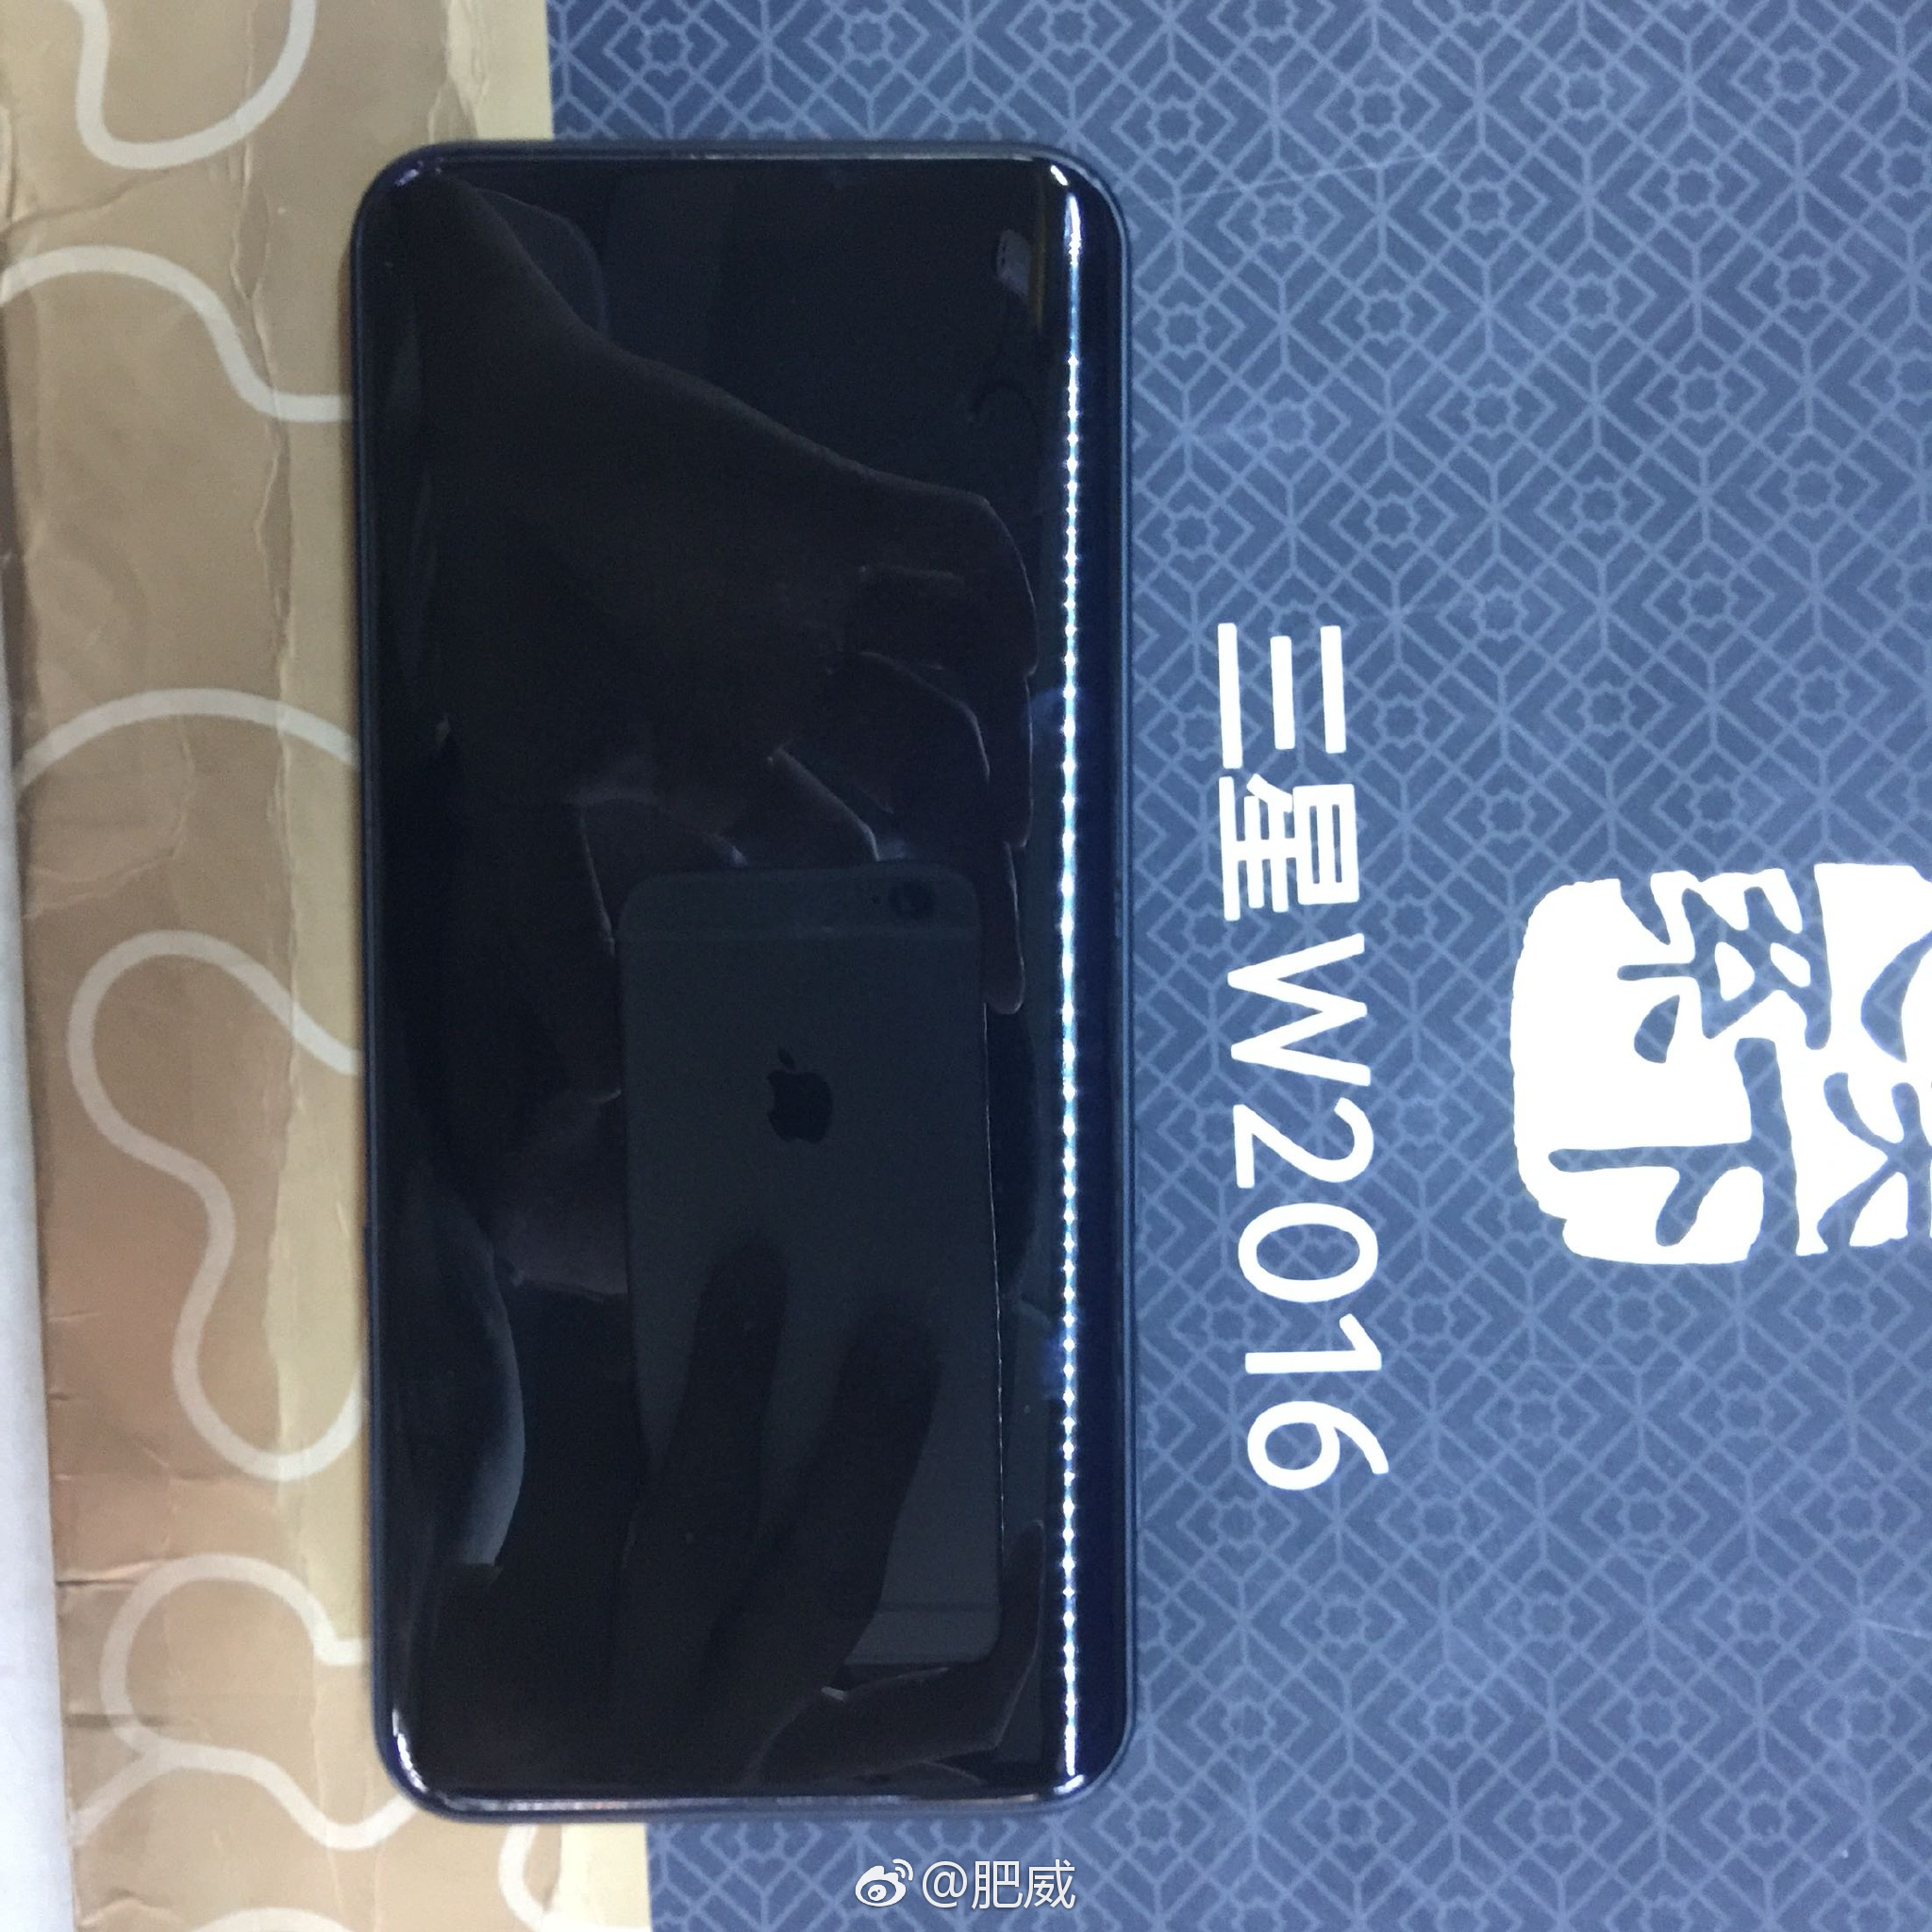 Black color Galaxy S8 leaks in new pics 8